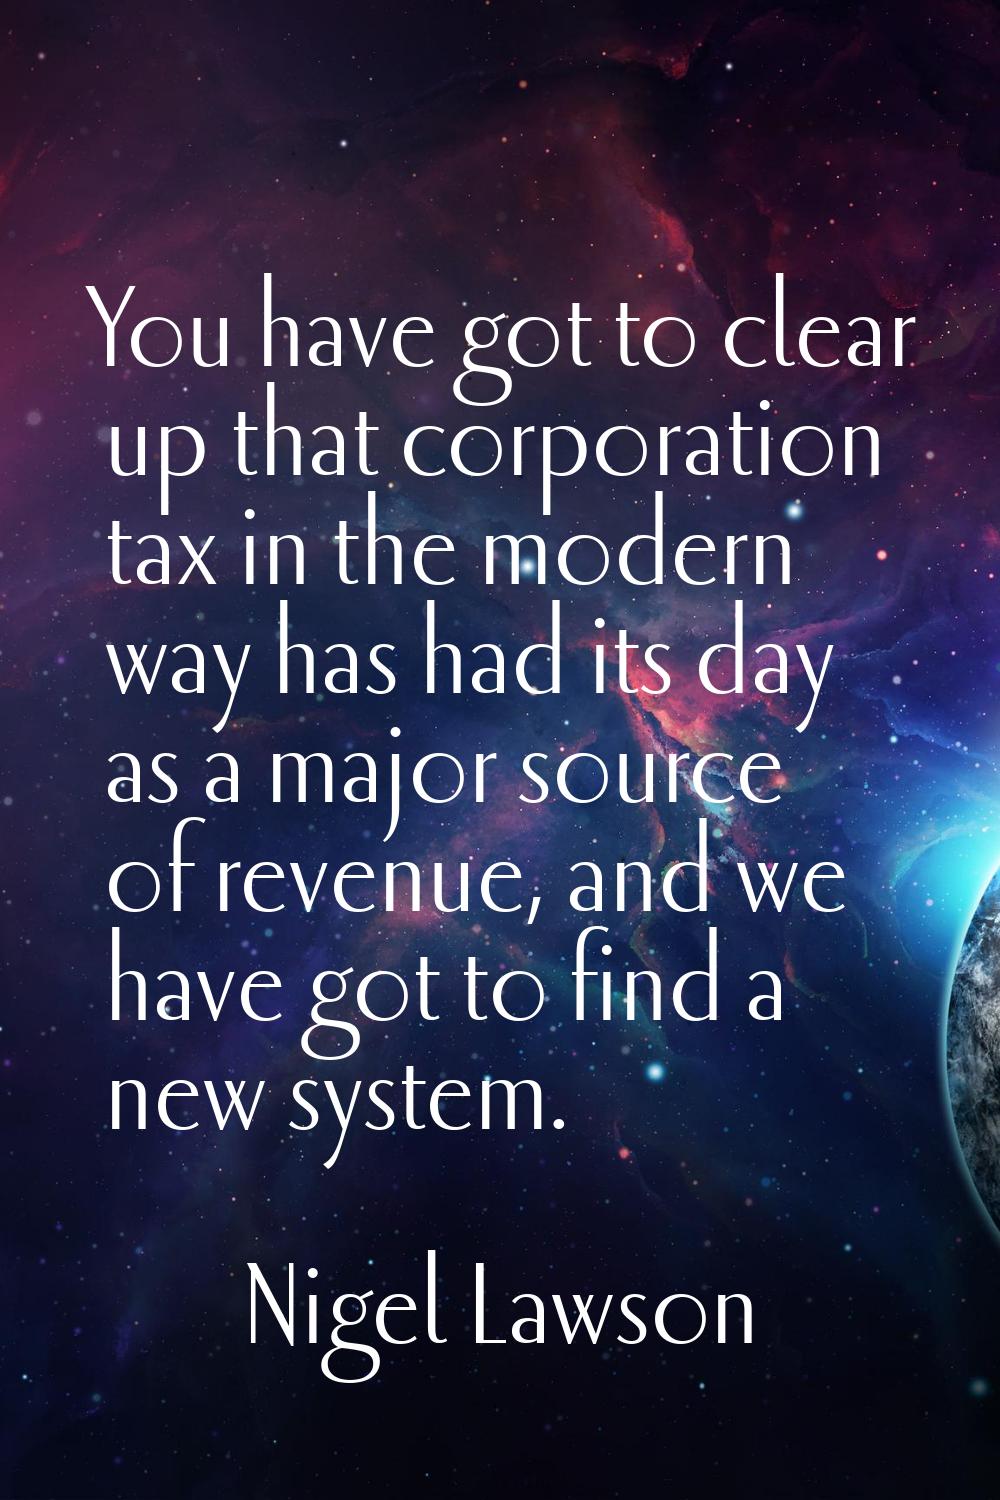 You have got to clear up that corporation tax in the modern way has had its day as a major source o